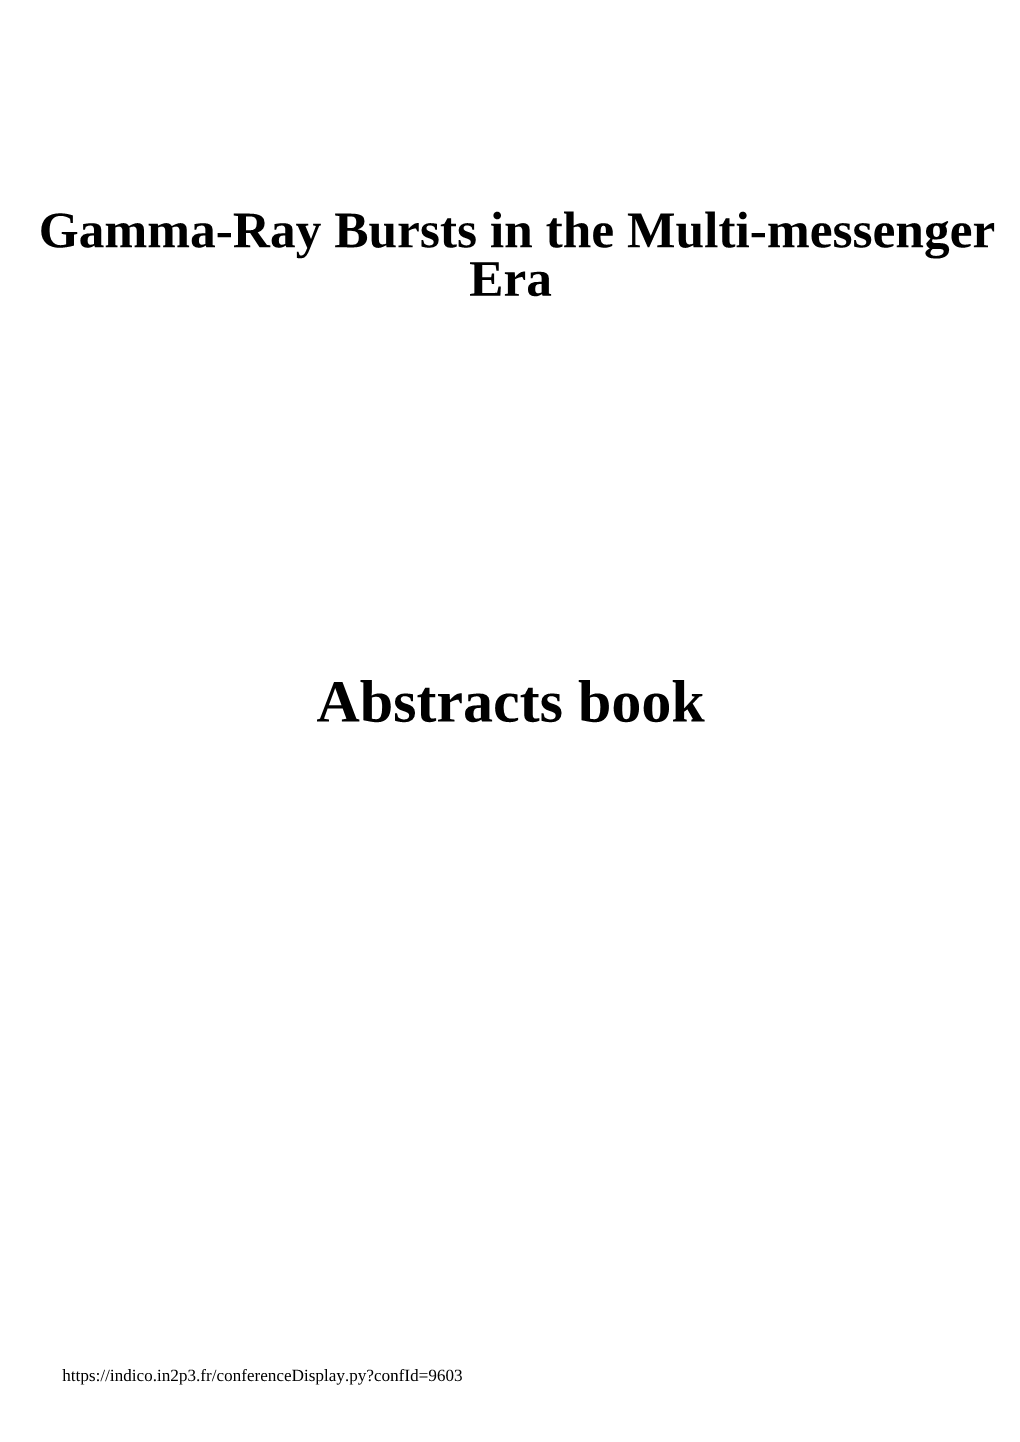 Gamma-Ray Bursts in the Multi-Messenger Era Abstracts Book